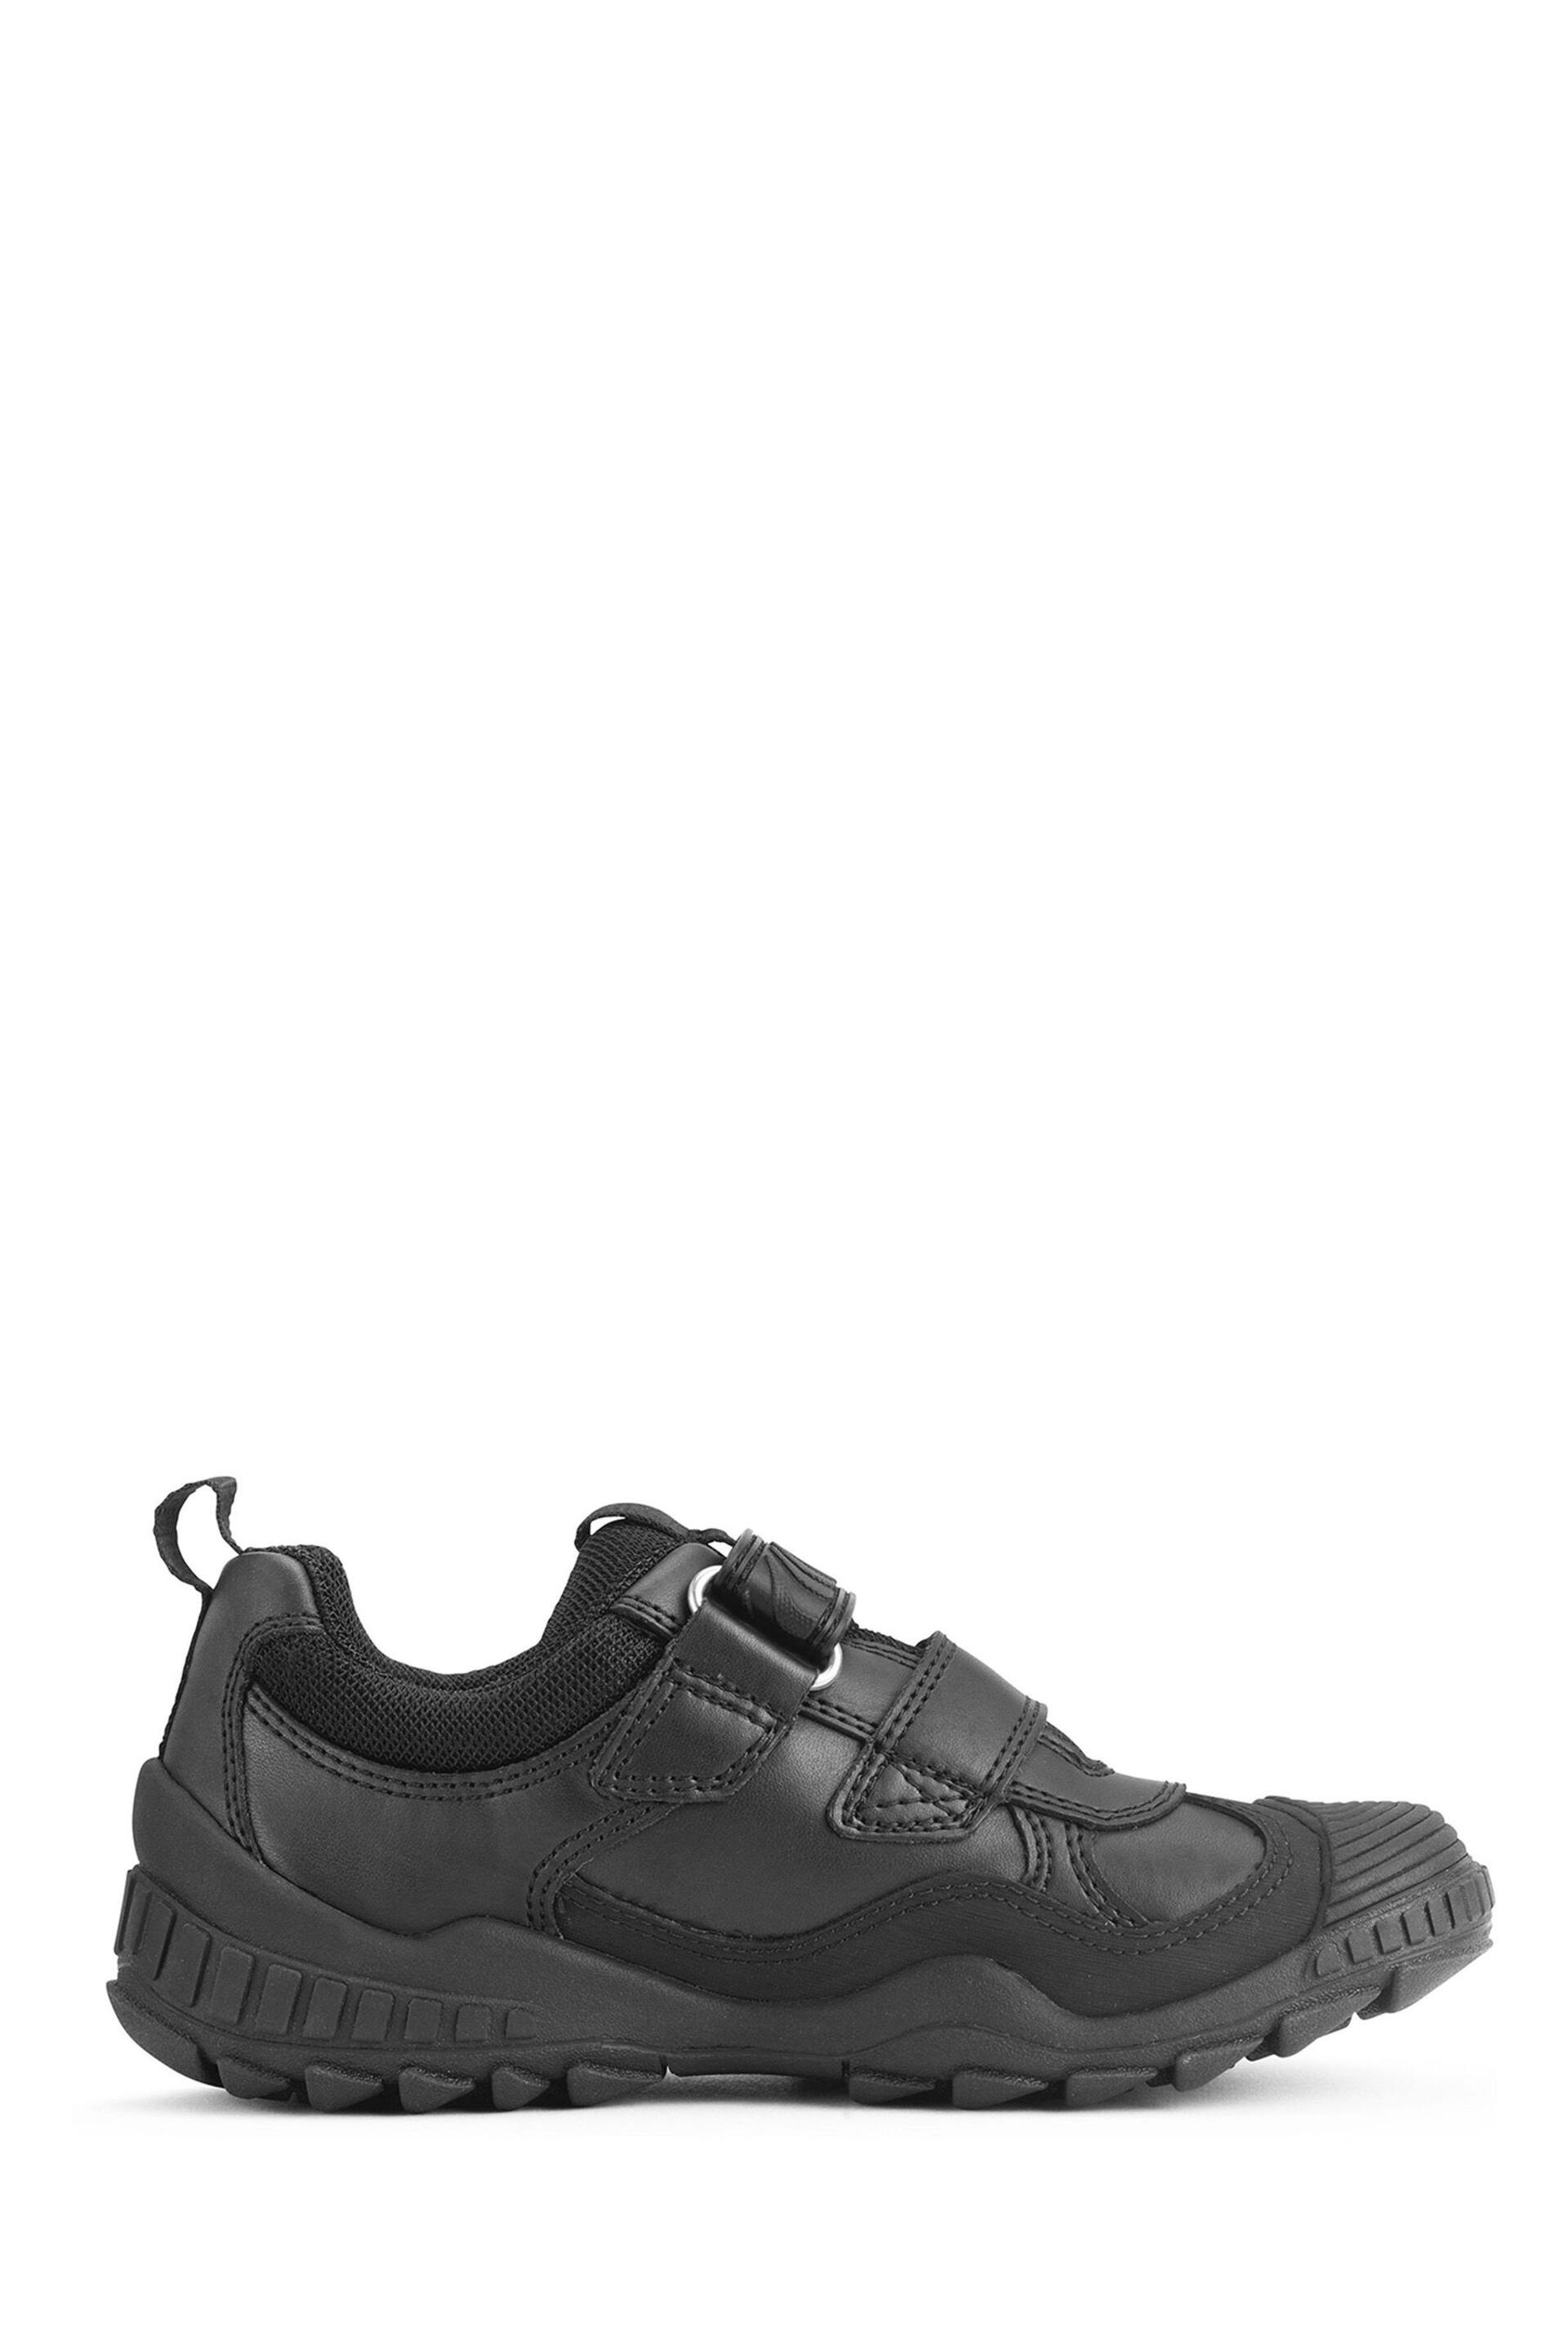 Start-Rite Extreme Pri Black Leather School Shoes F Fit - Image 3 of 5